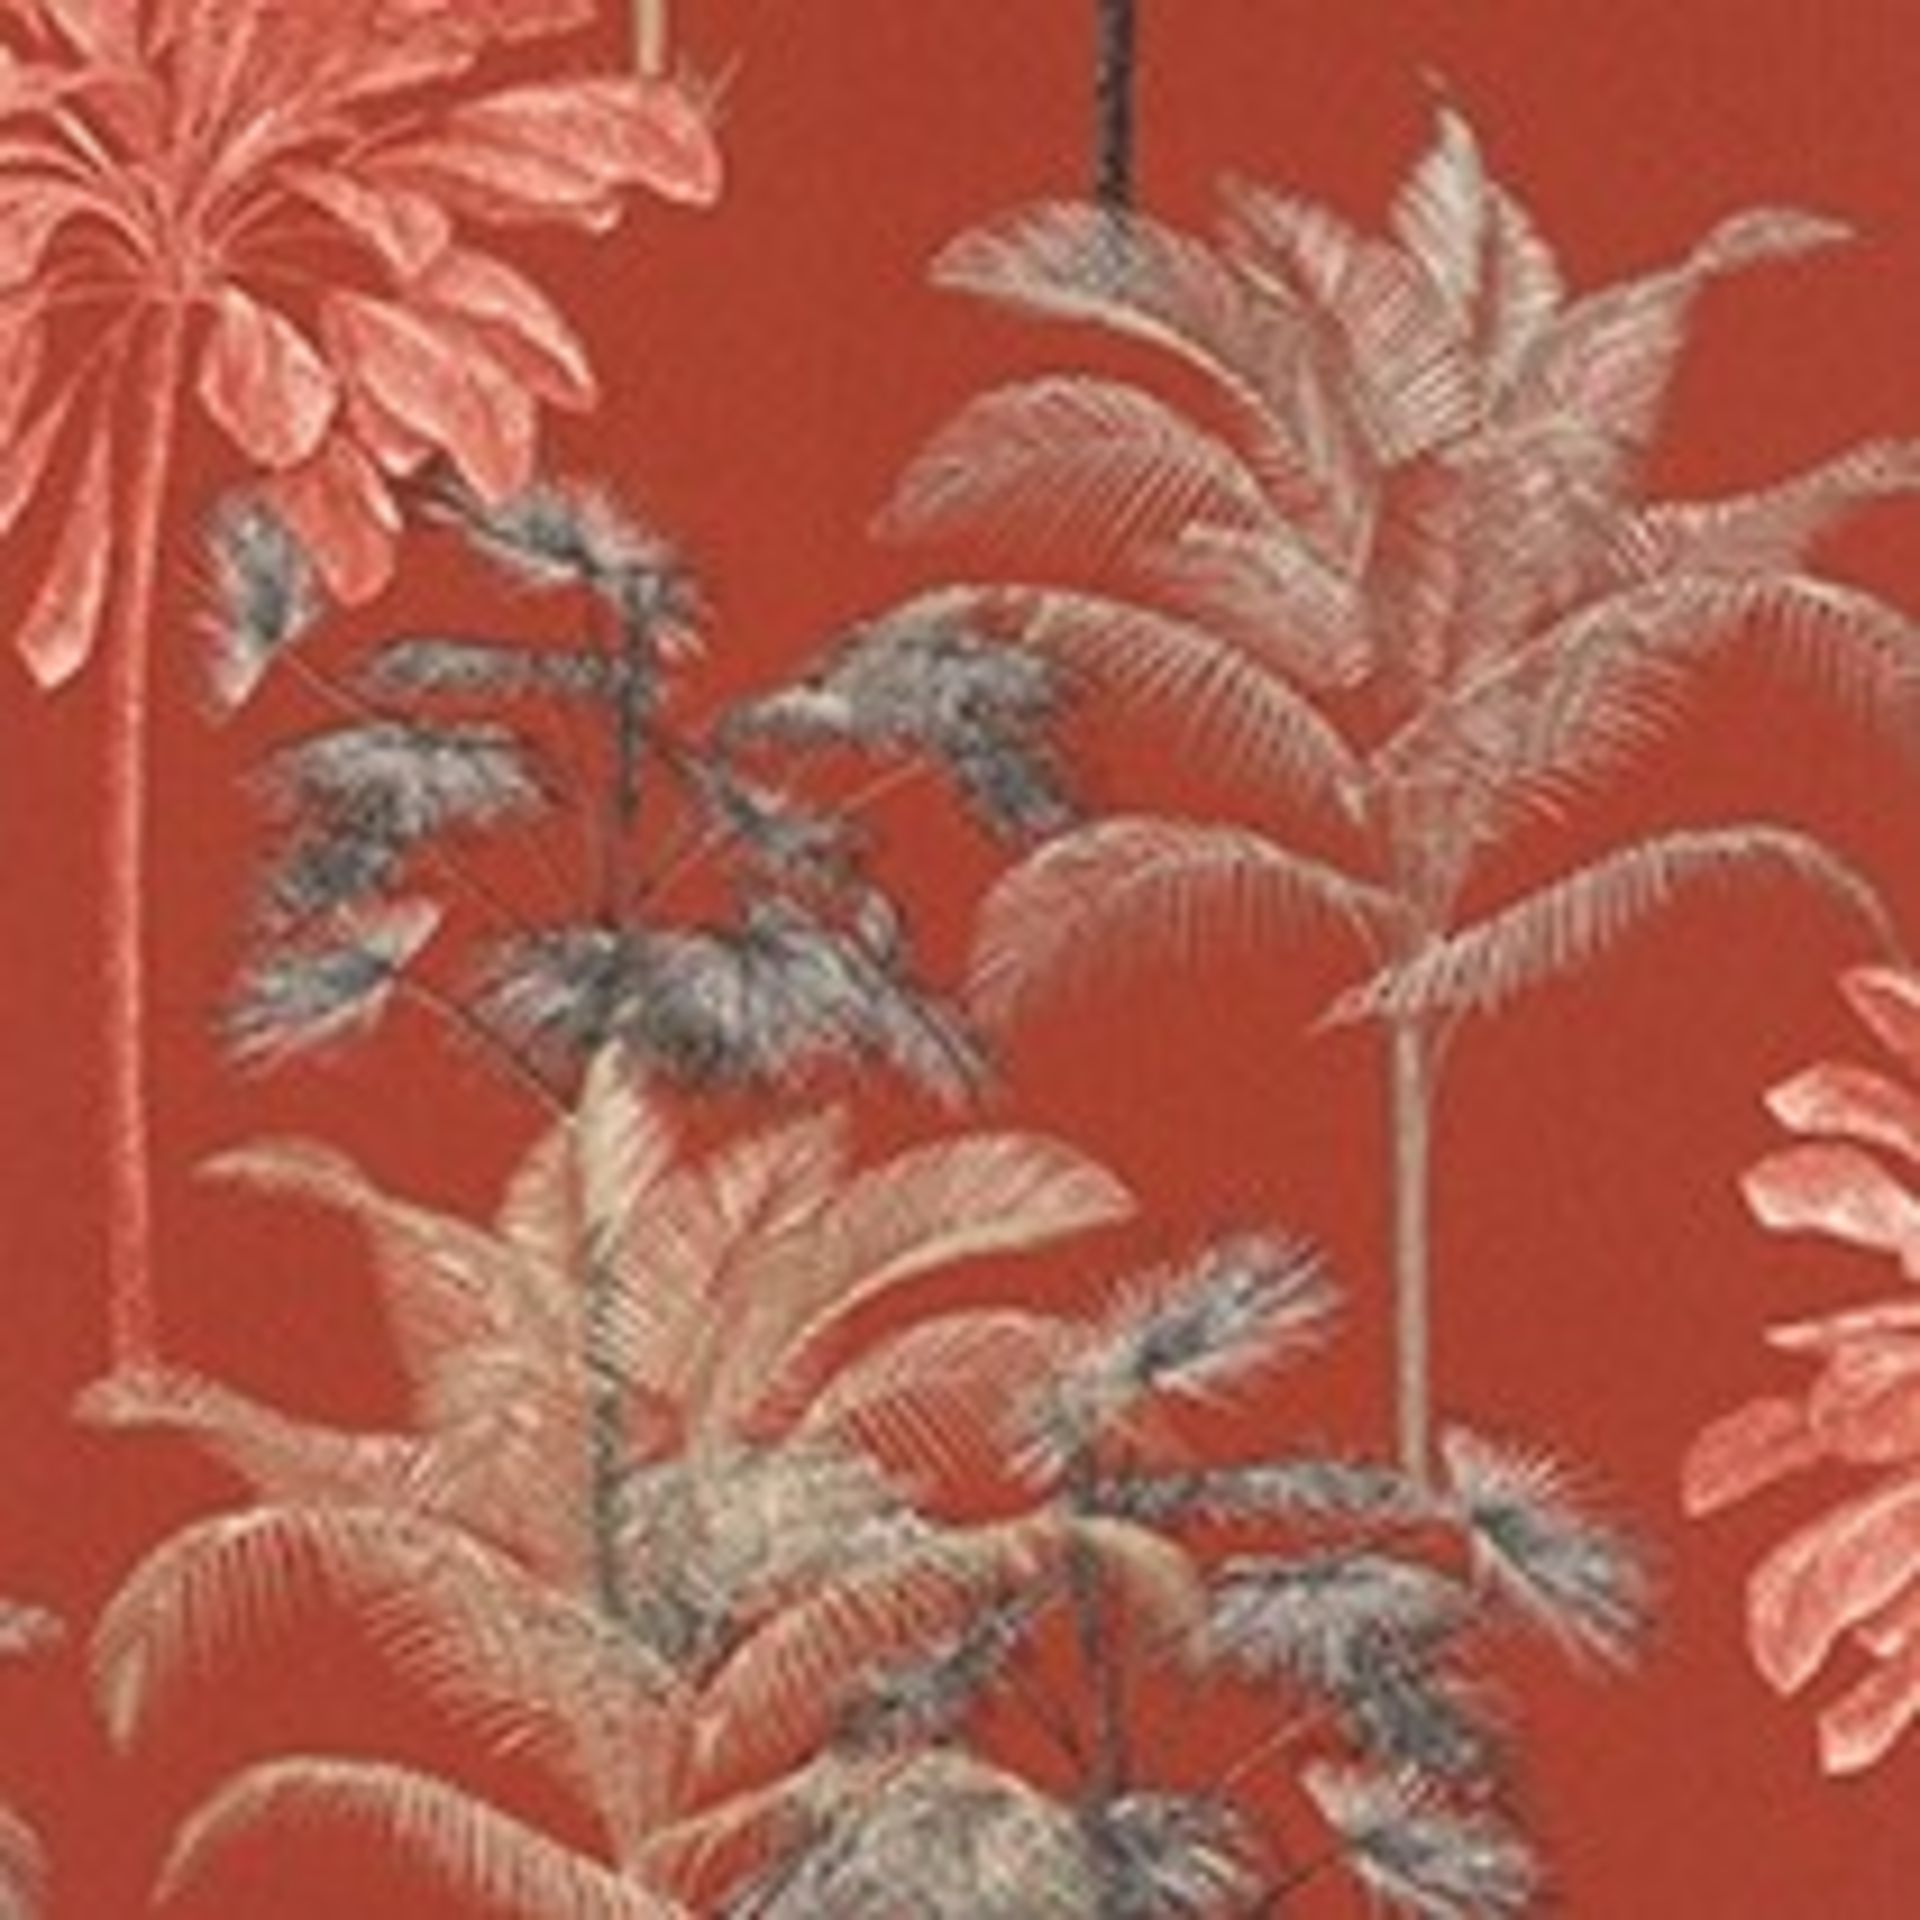 65 Rolls of Zanzibar Wallpaper (Bays 1607 – 1623) (Library Images – Some Colours May Not Be - Image 17 of 23